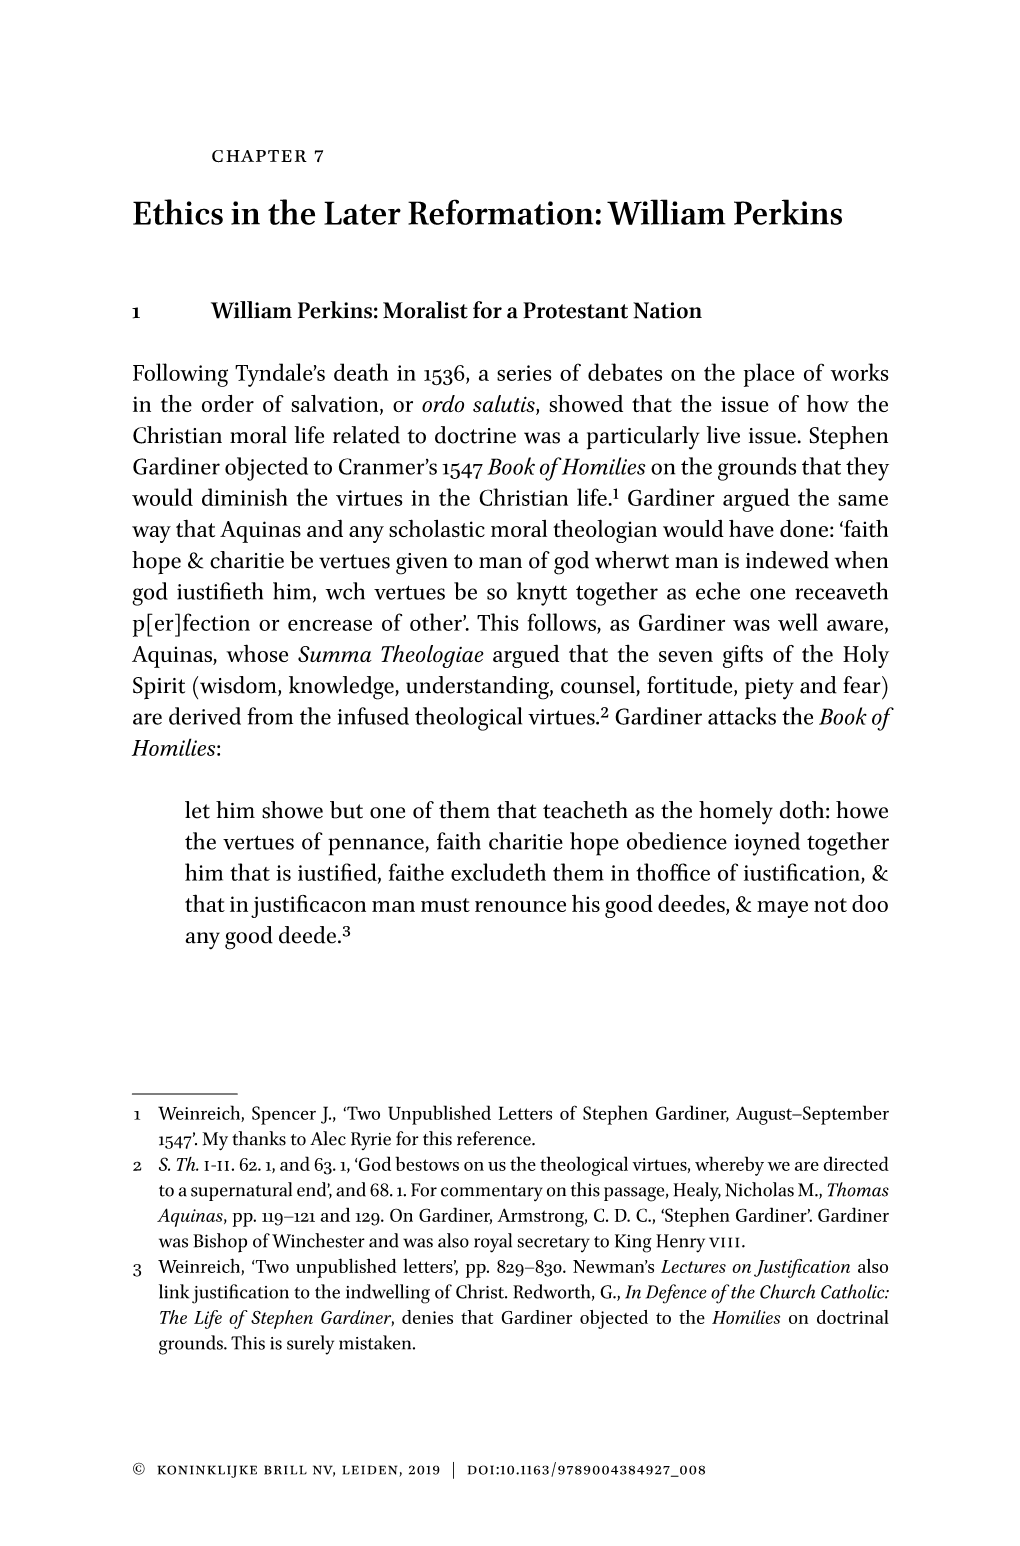 Ethics in the Later Reformation: William Perkins